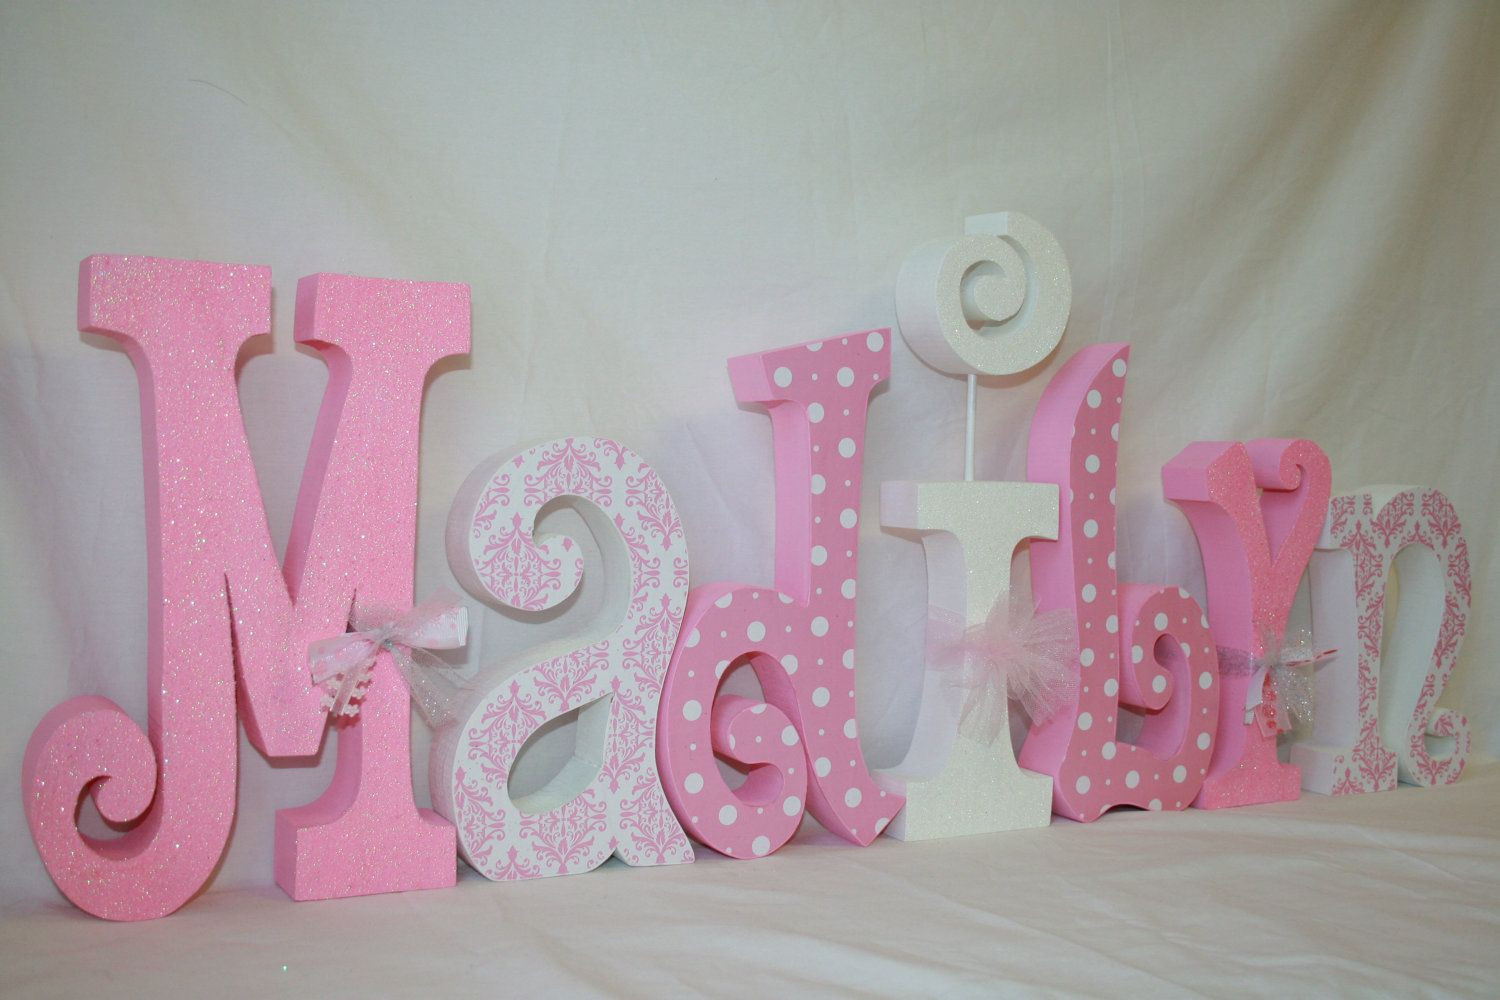 Baby Name Letters Room Decor
 Nursery letters Baby name letters pink and by